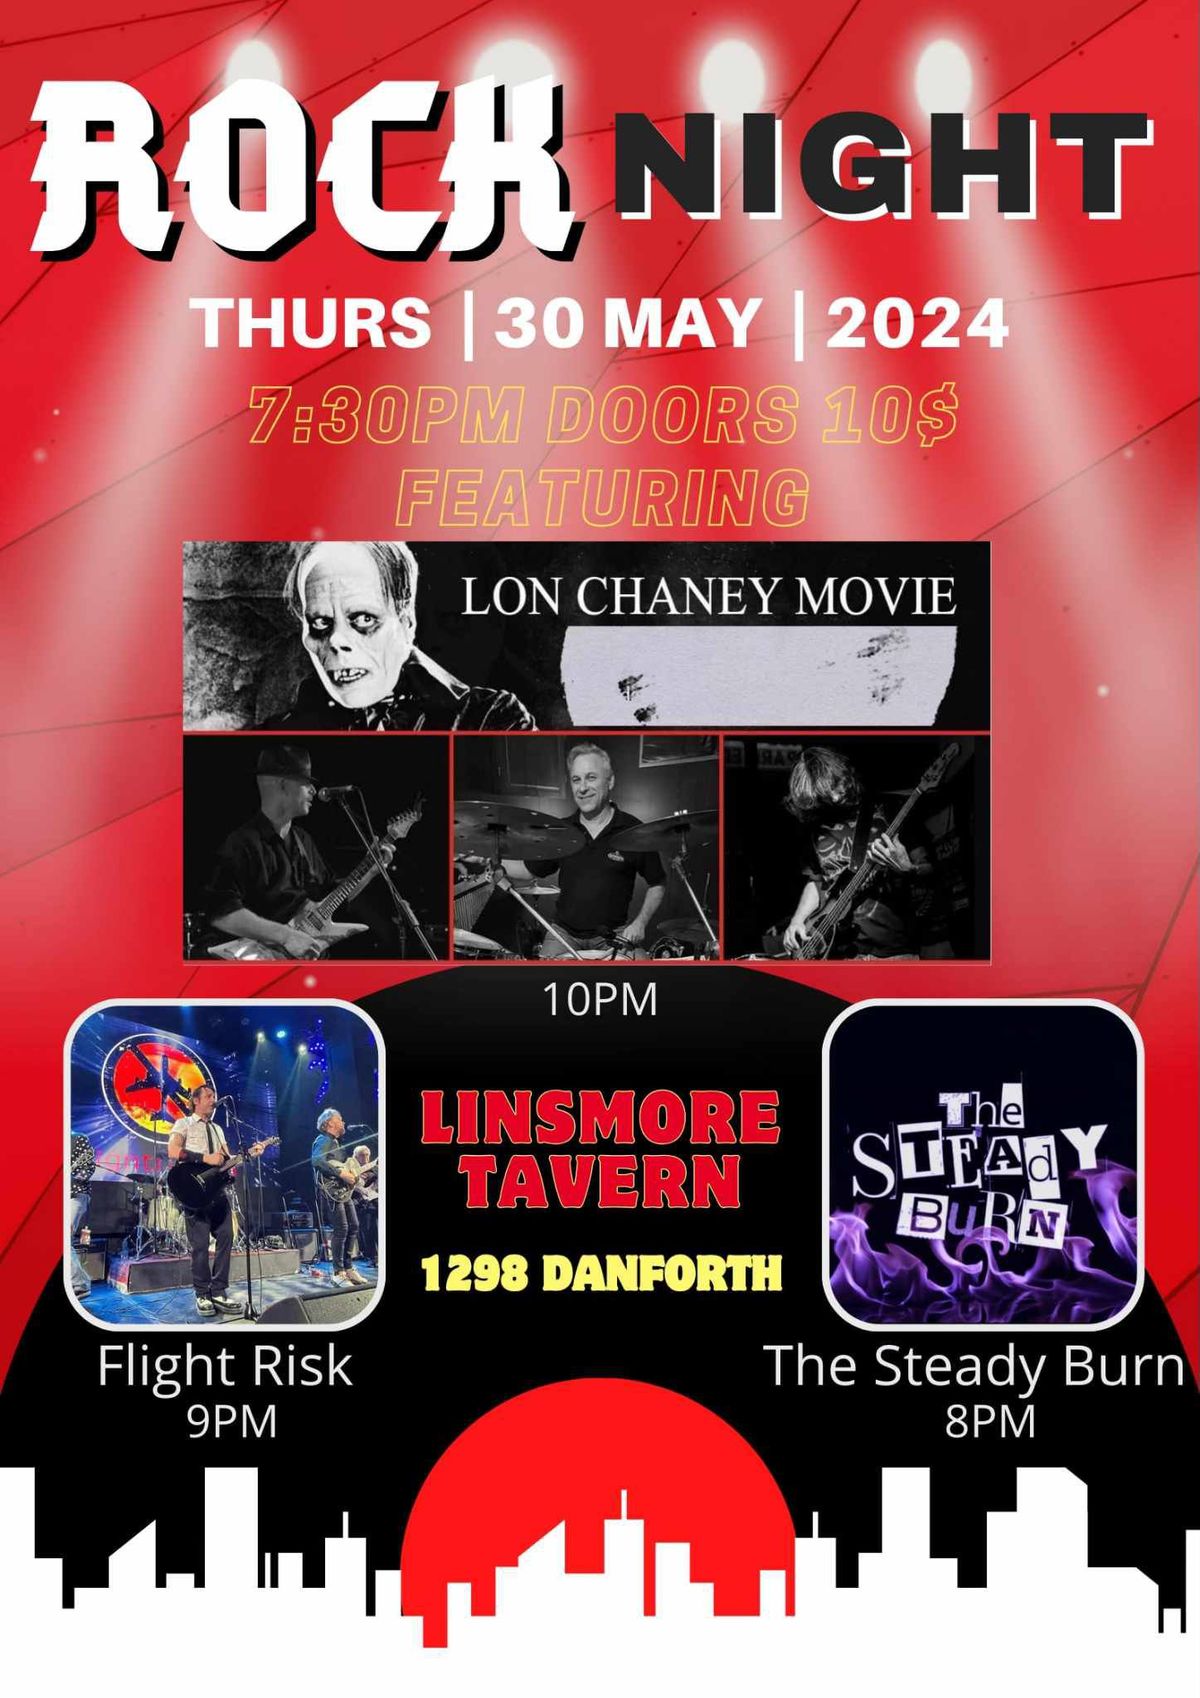 Lon Chaney Movie, Flight Risk, and The Steady Burn Live at the Linsmore Tavern!